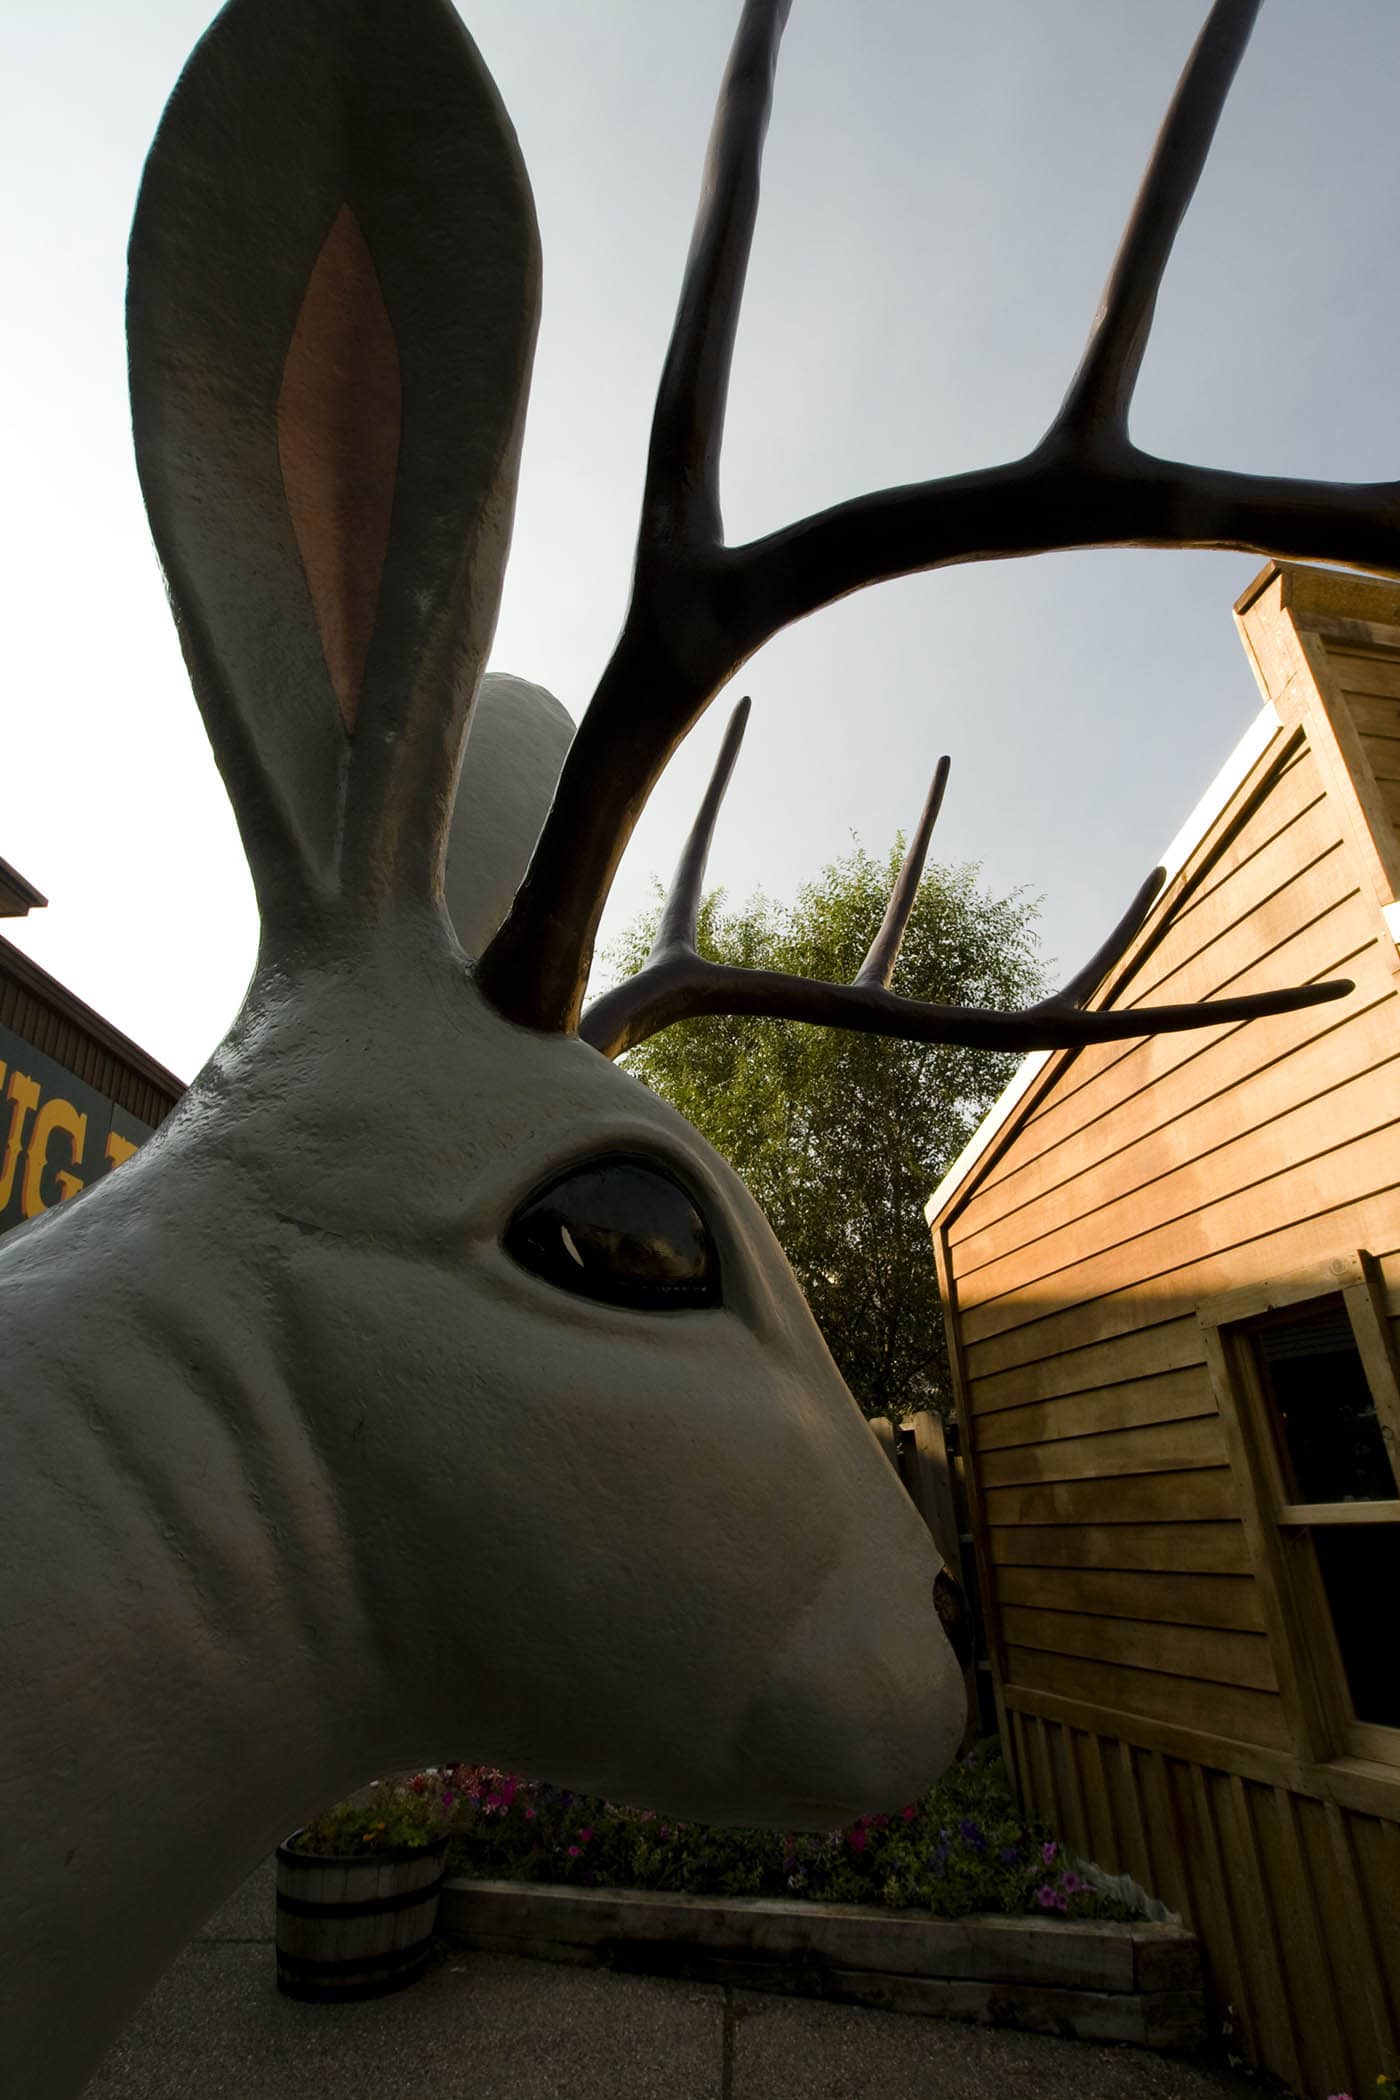 Ride the Jackalope at Wall Drug Store in Wall, South Dakota